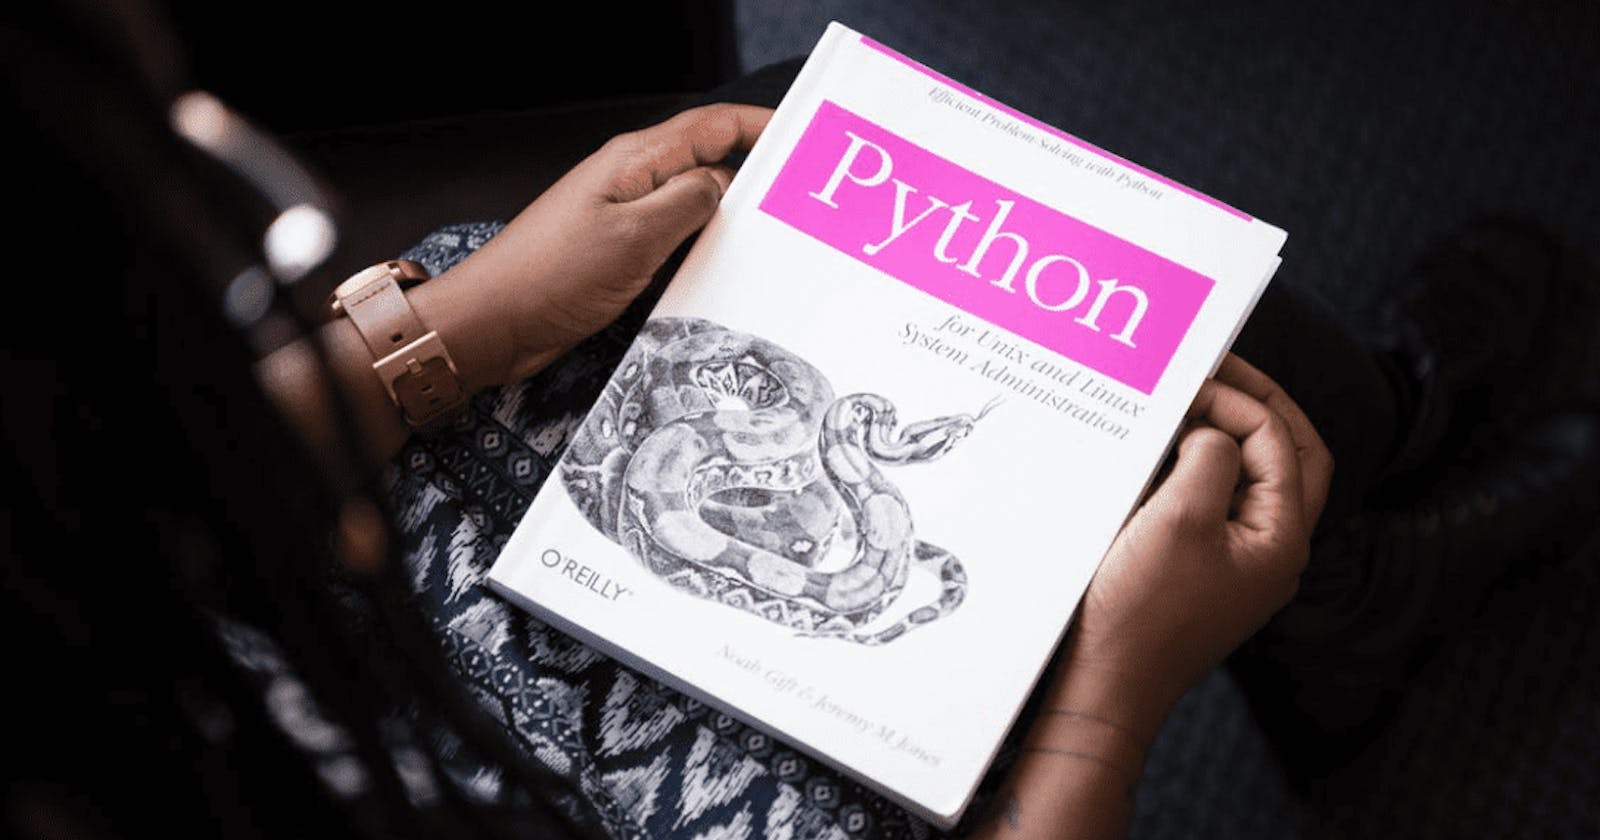 Skills To Look For In Python Developers